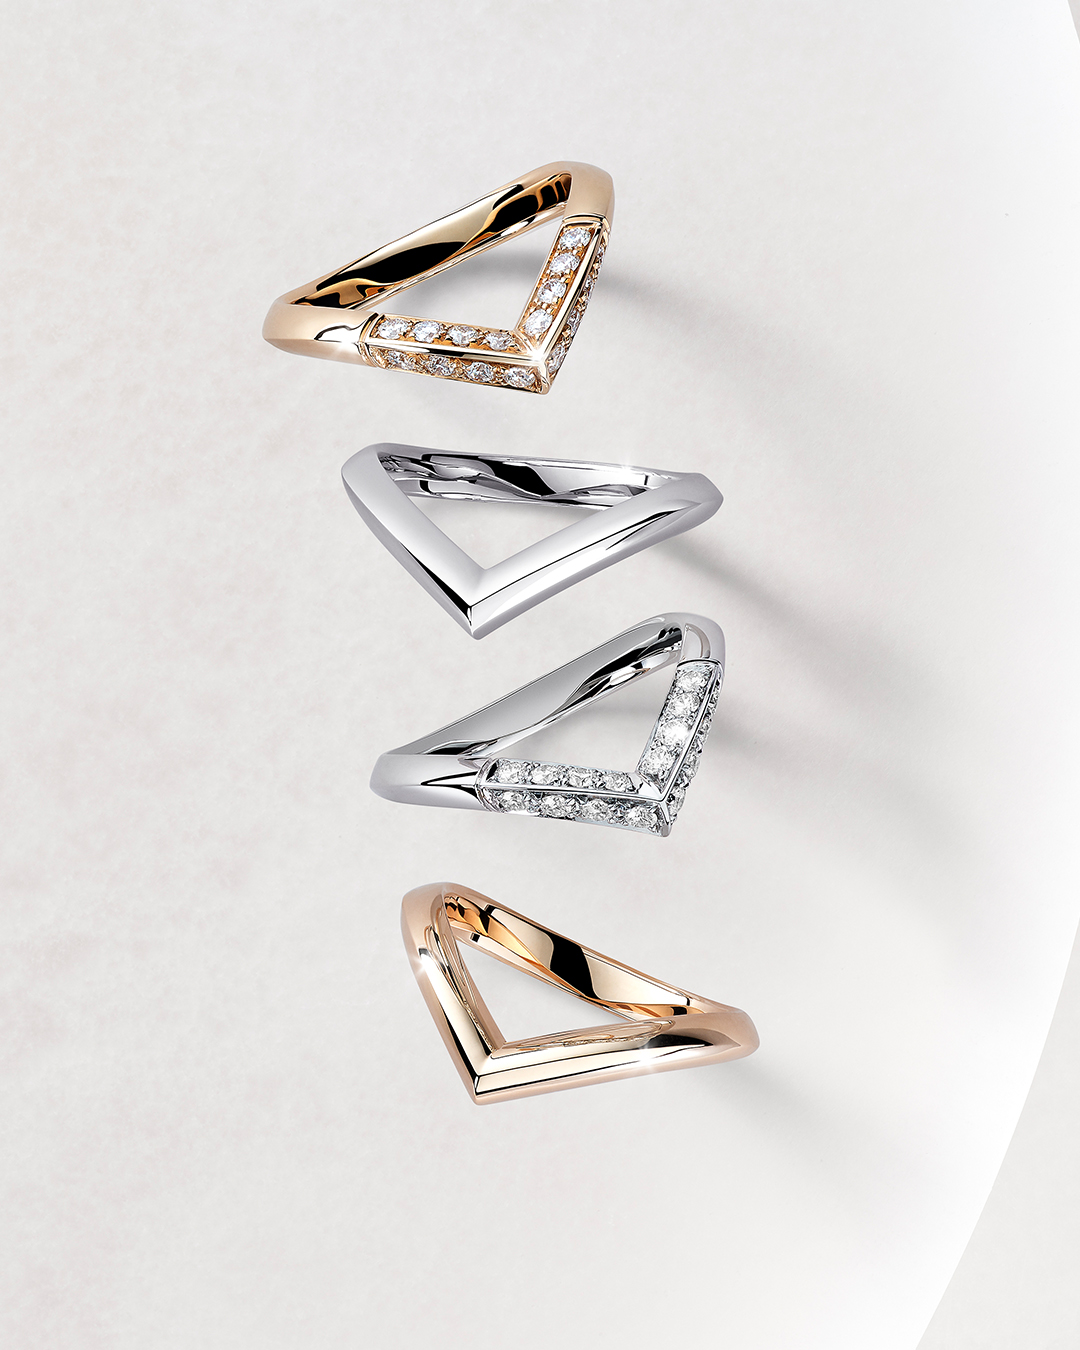 Louis Vuitton's New LV Diamonds Fine Jewelry Collection Gives